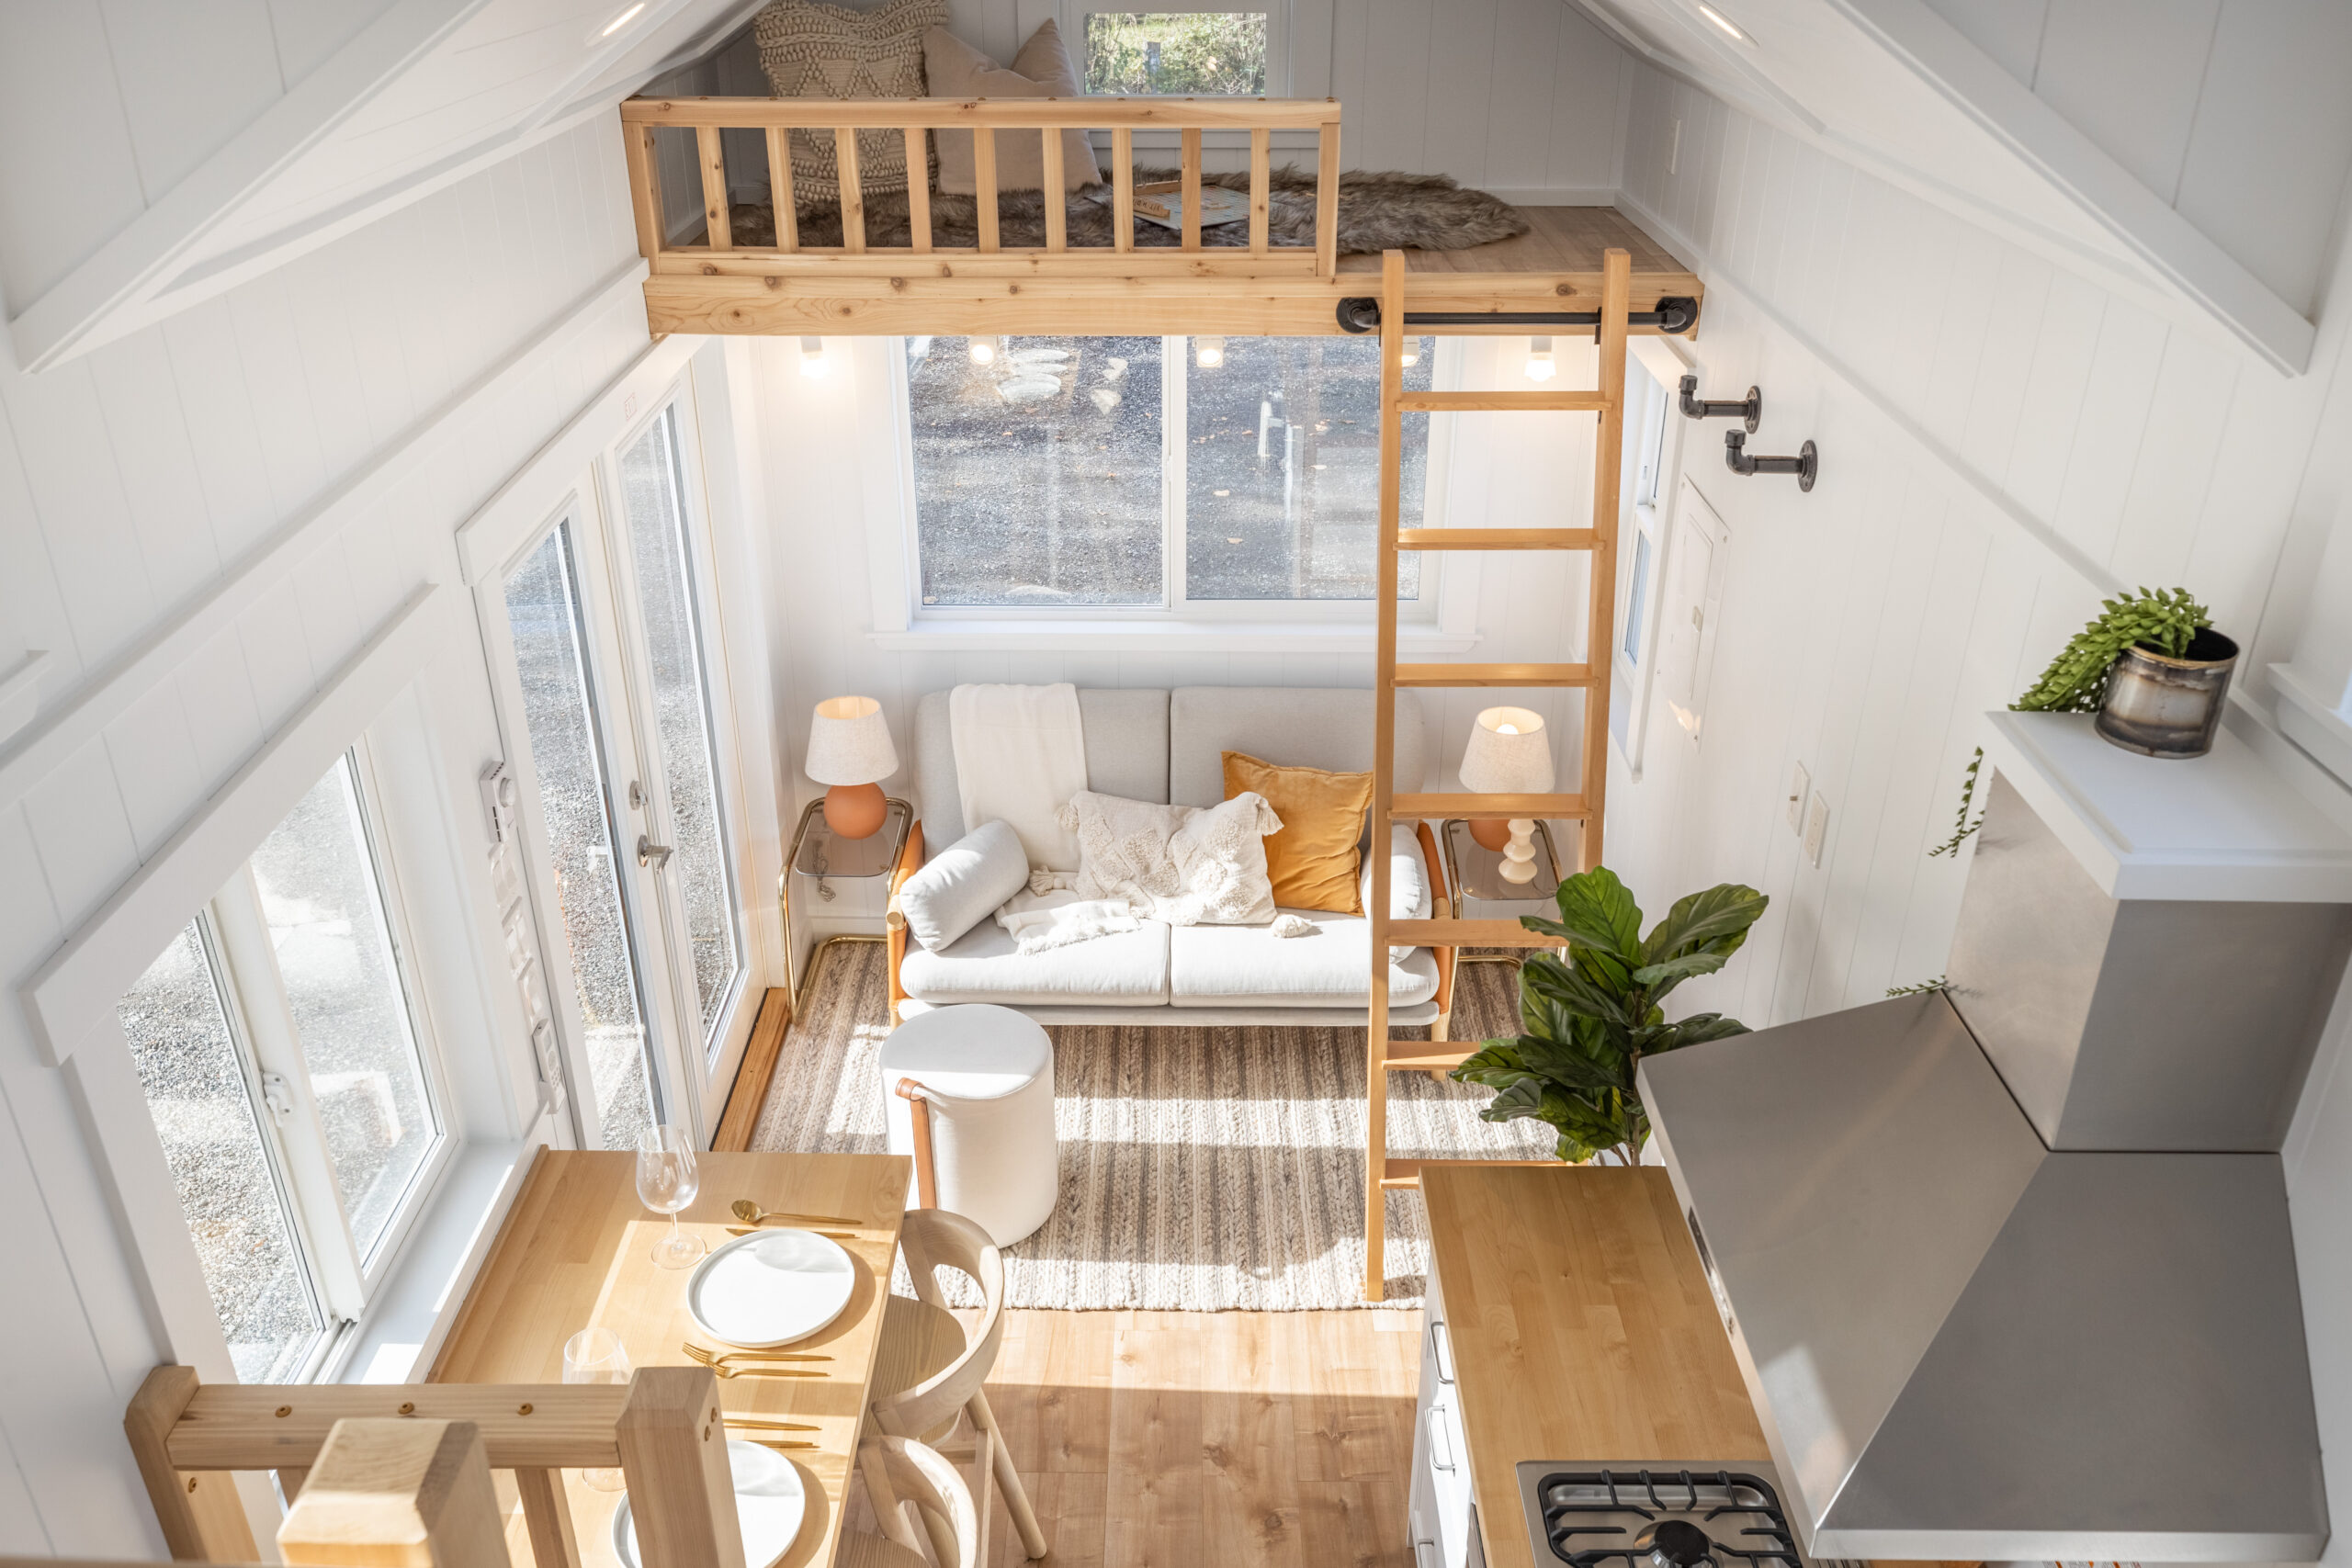 Mint Tiny Home Designs - Secrets of Our Signature Style​